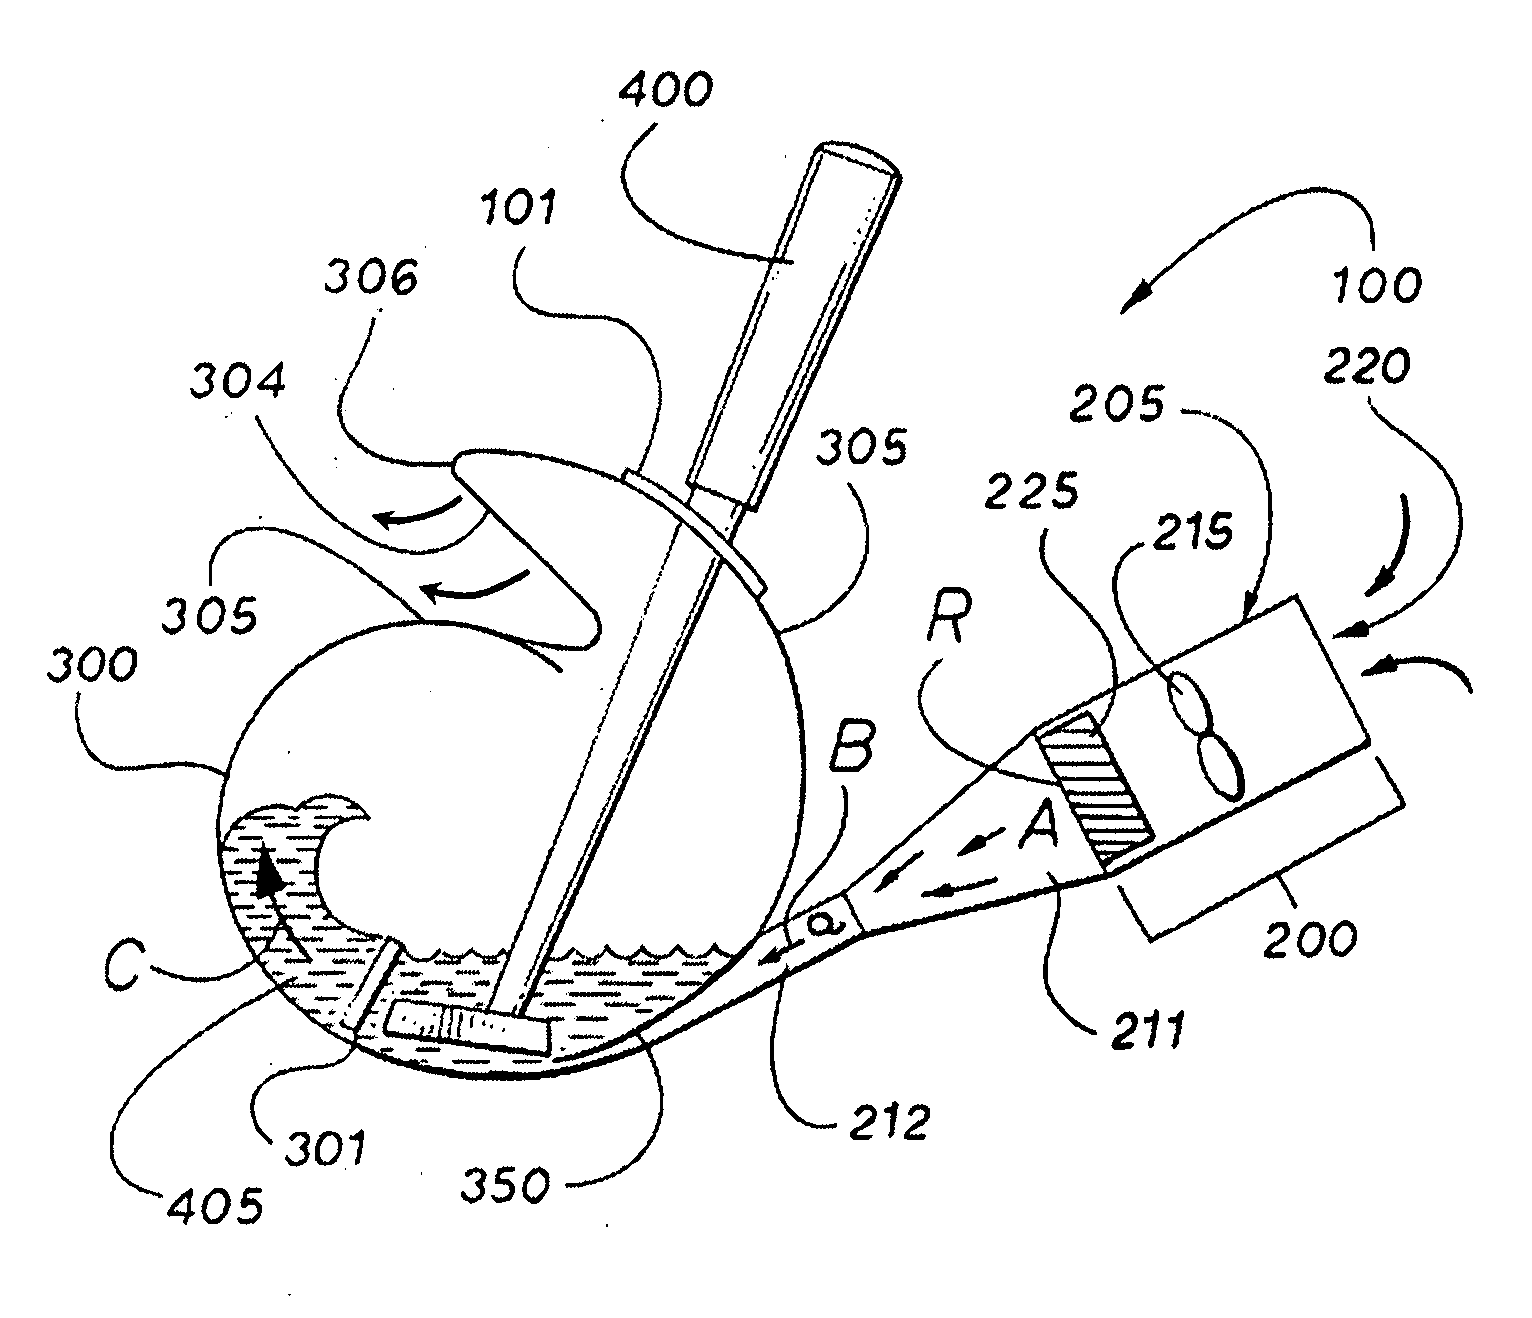 Cleaning and drying system for a personal hygiene device